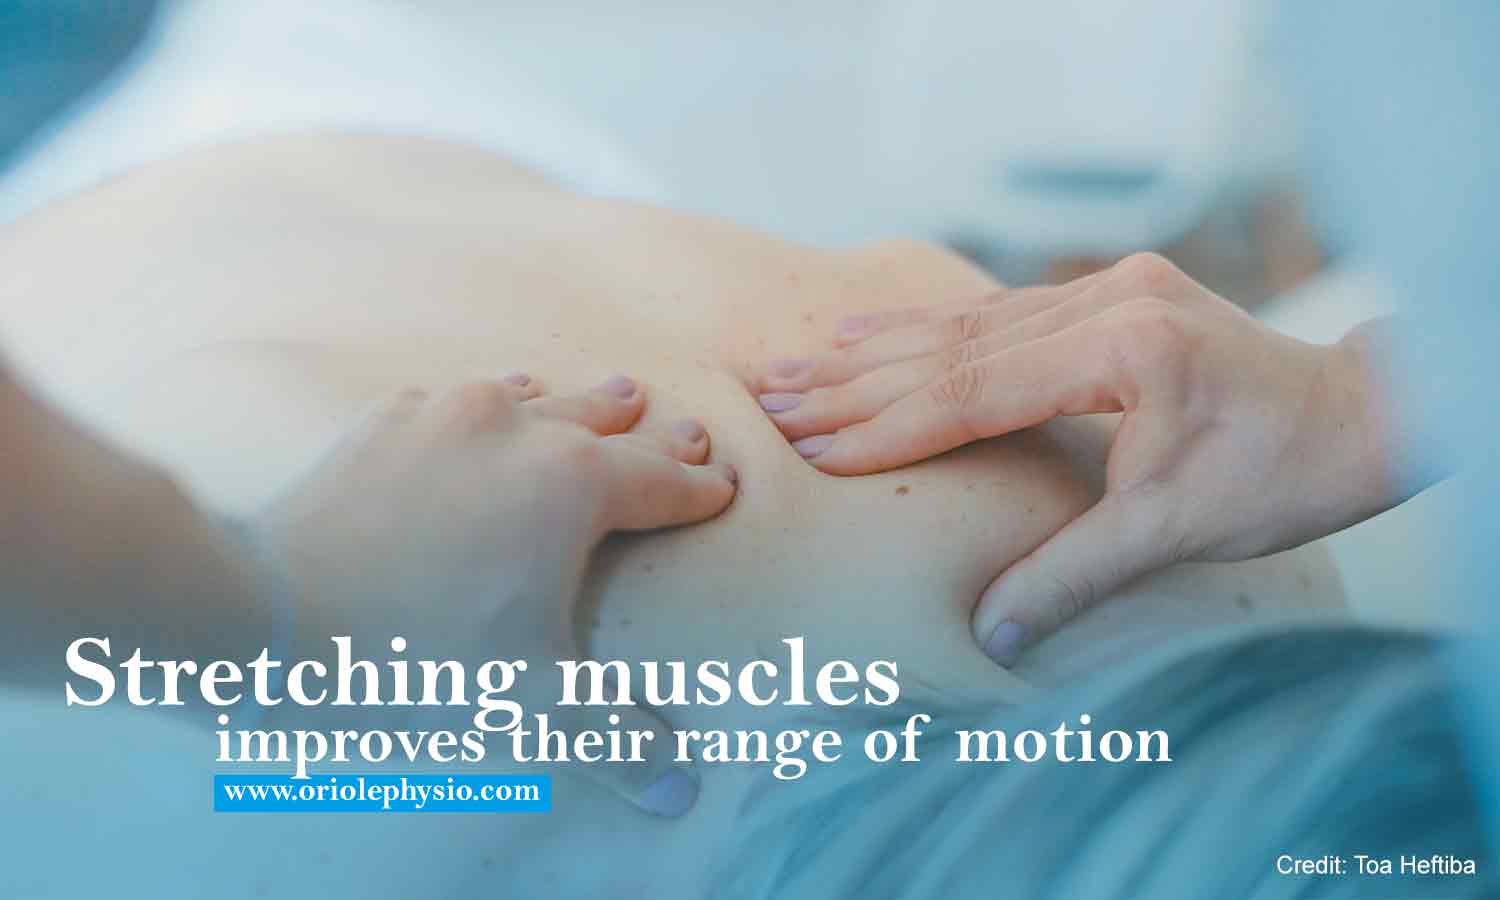 Stretching muscles improves their range of motion